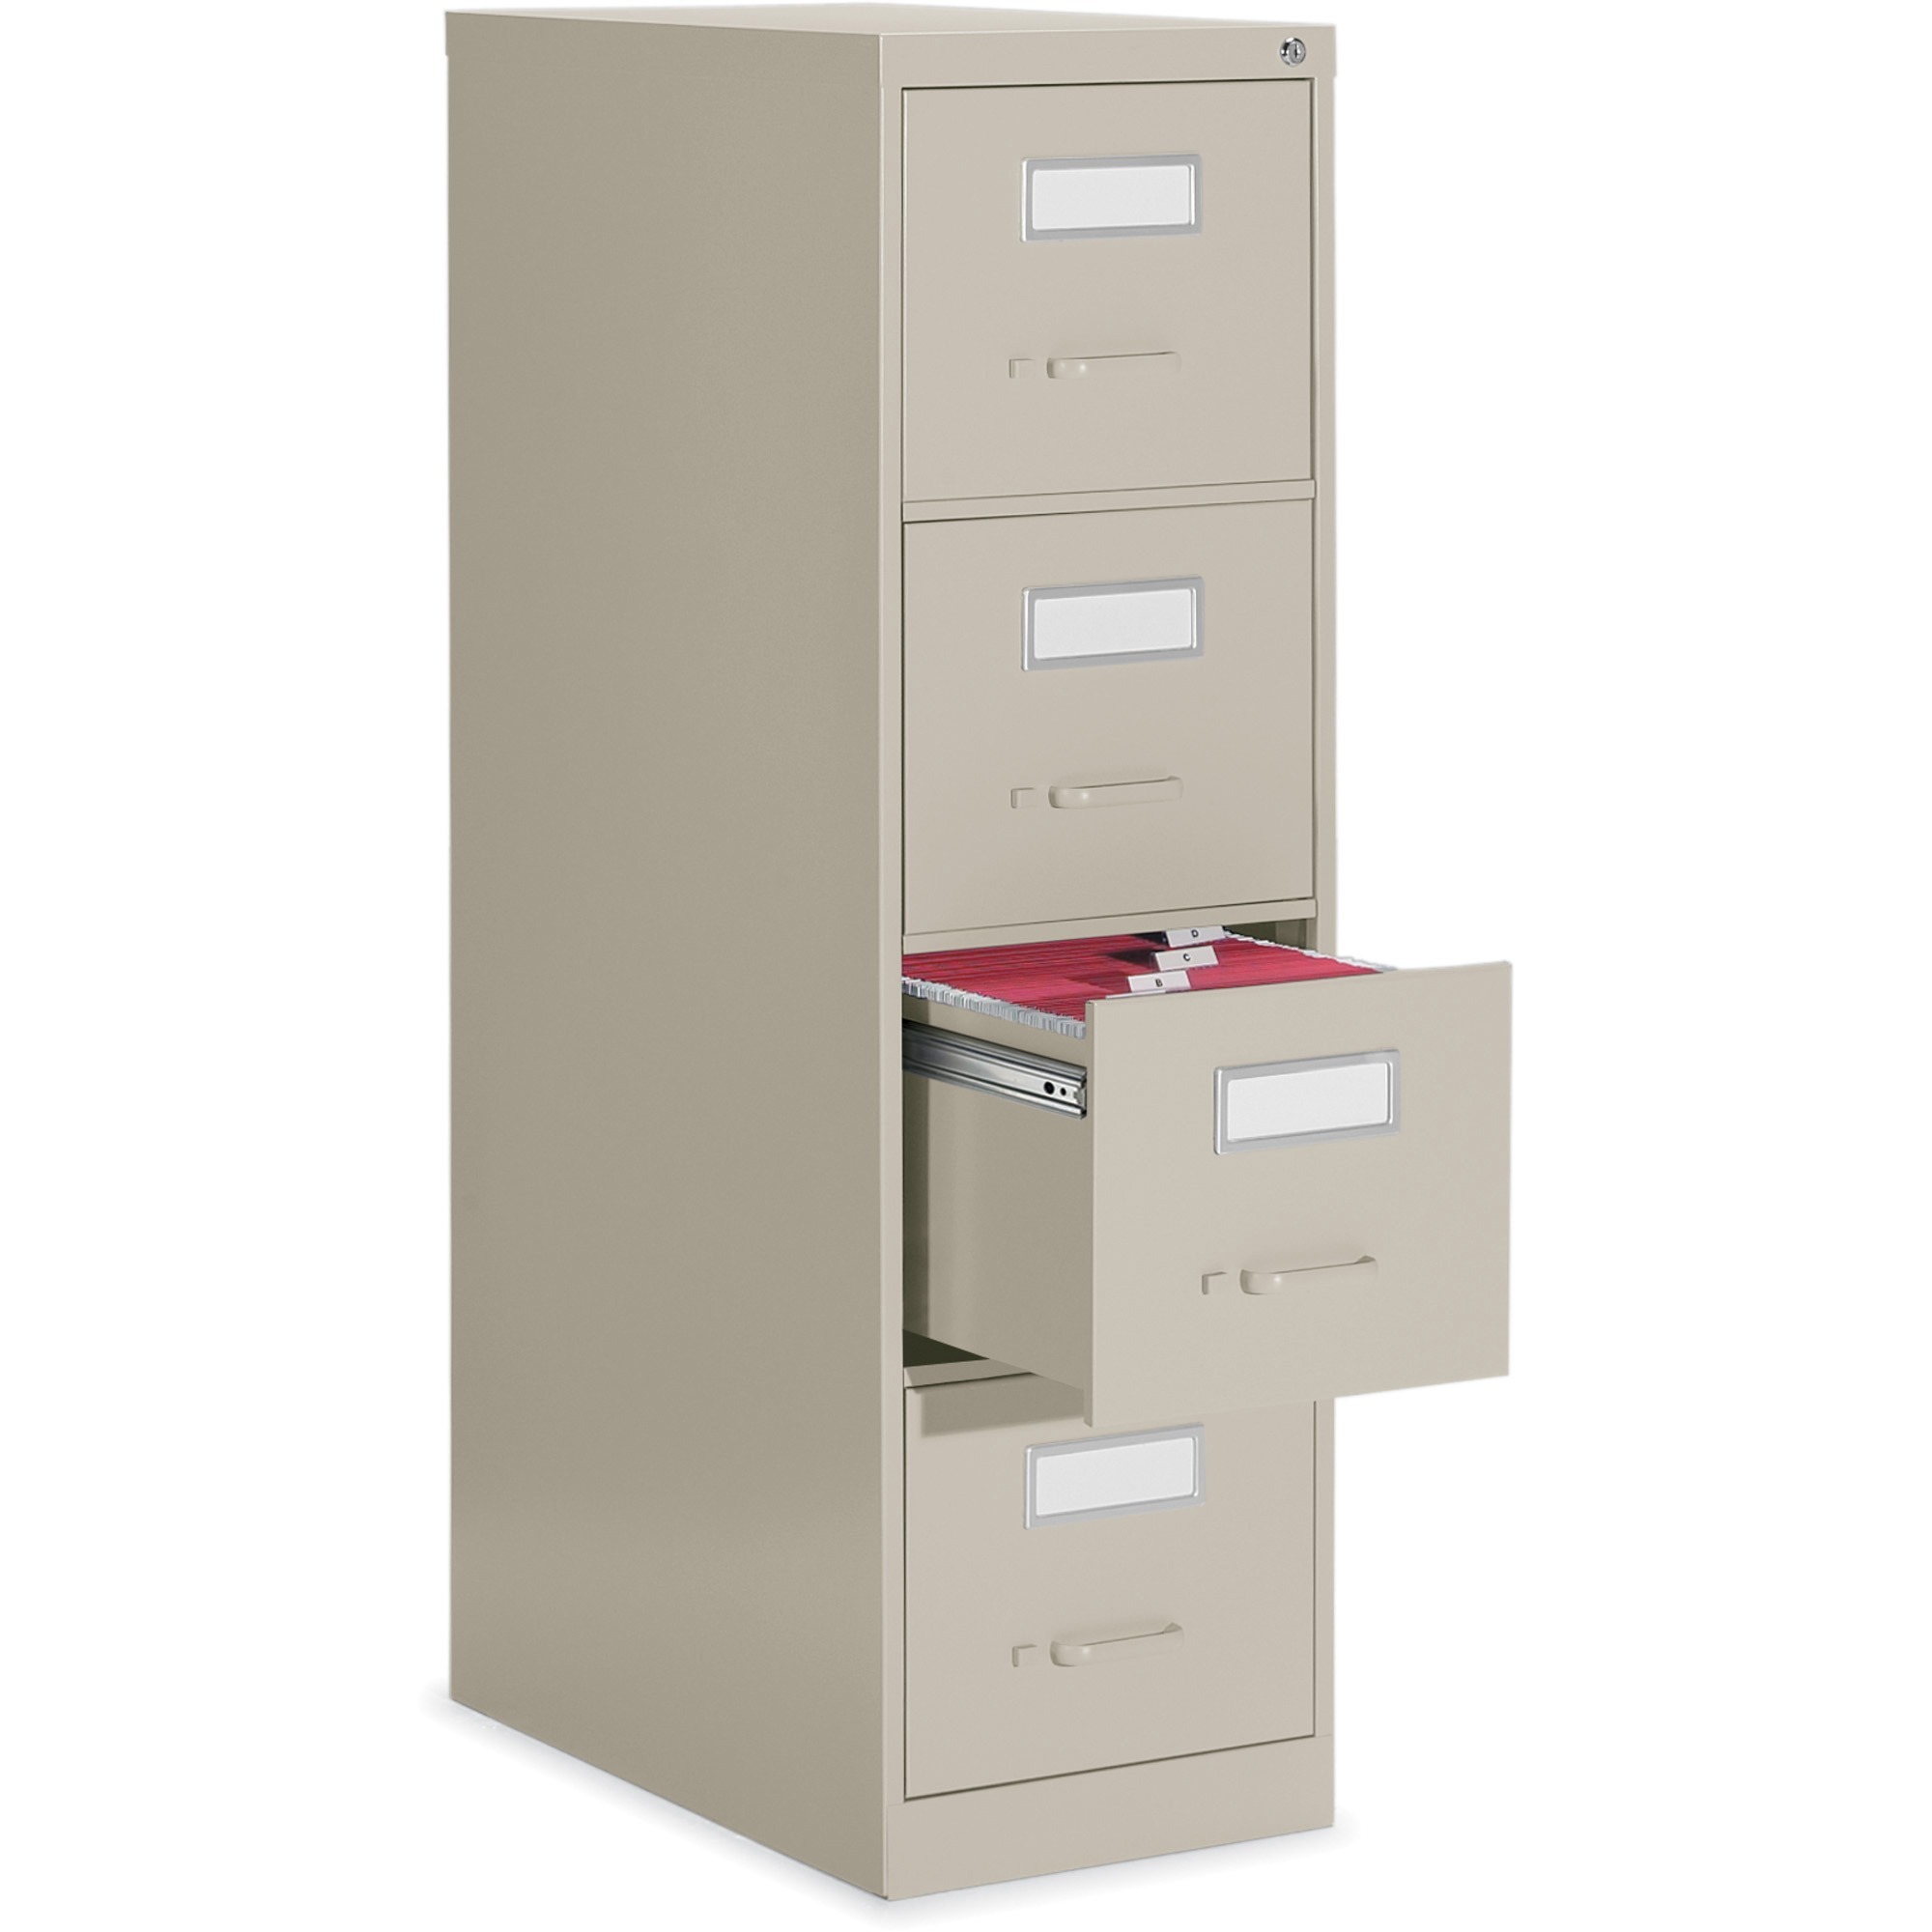 Global 2600 Vertical File Cabinet 15 X 26 6 X 52 4 X Drawer S For File Letter Vertical Ball Bearing Suspension Lockable Label Holder Pull Handle Nevada Metal Madill The Office Company